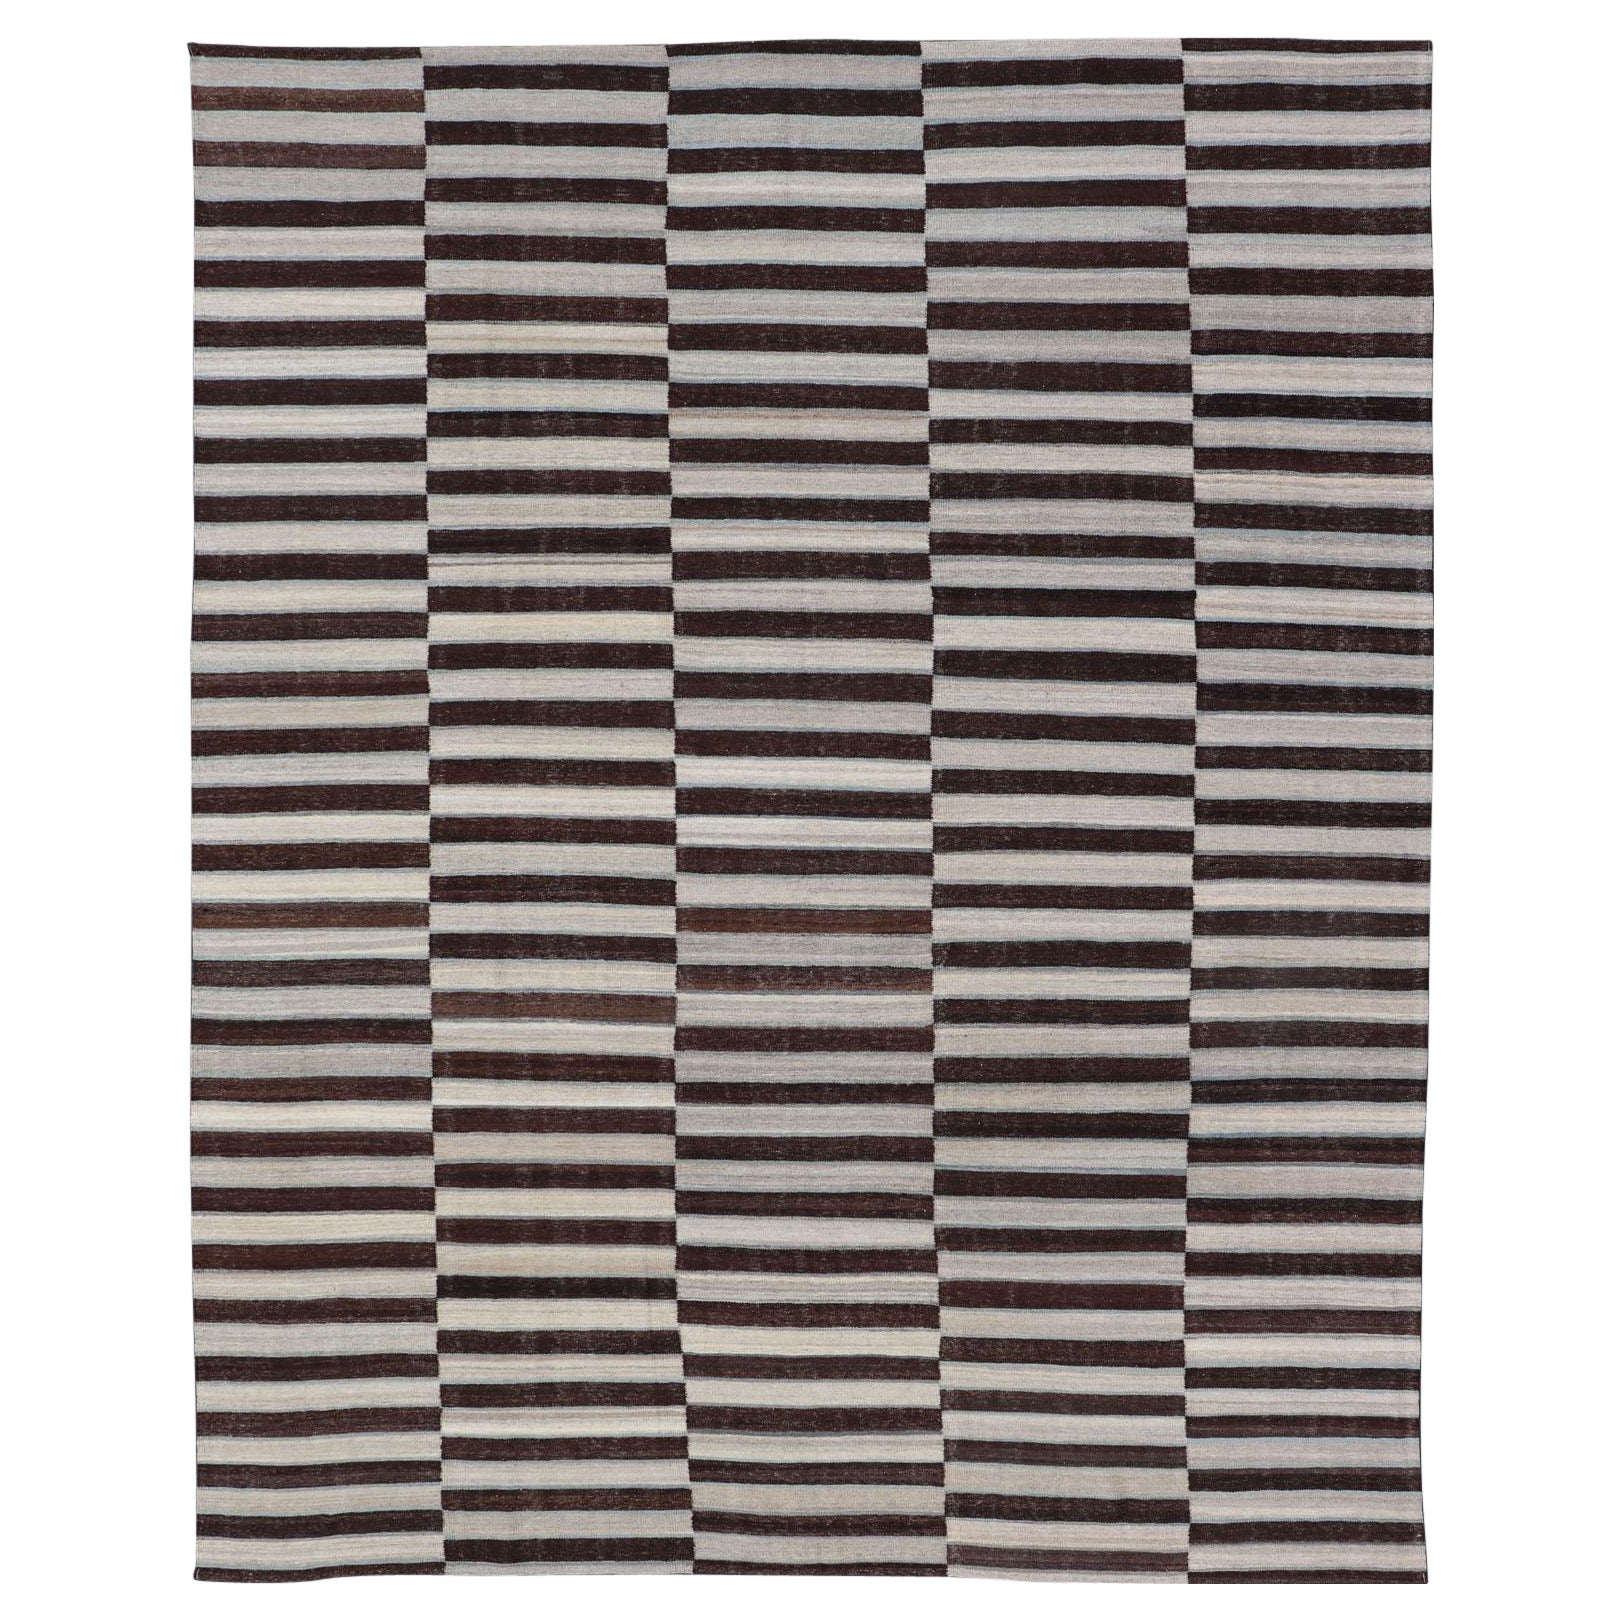 Modern Kilim Rug in Multi-Panel Striped Design with Chocolate Brown, cream  For Sale